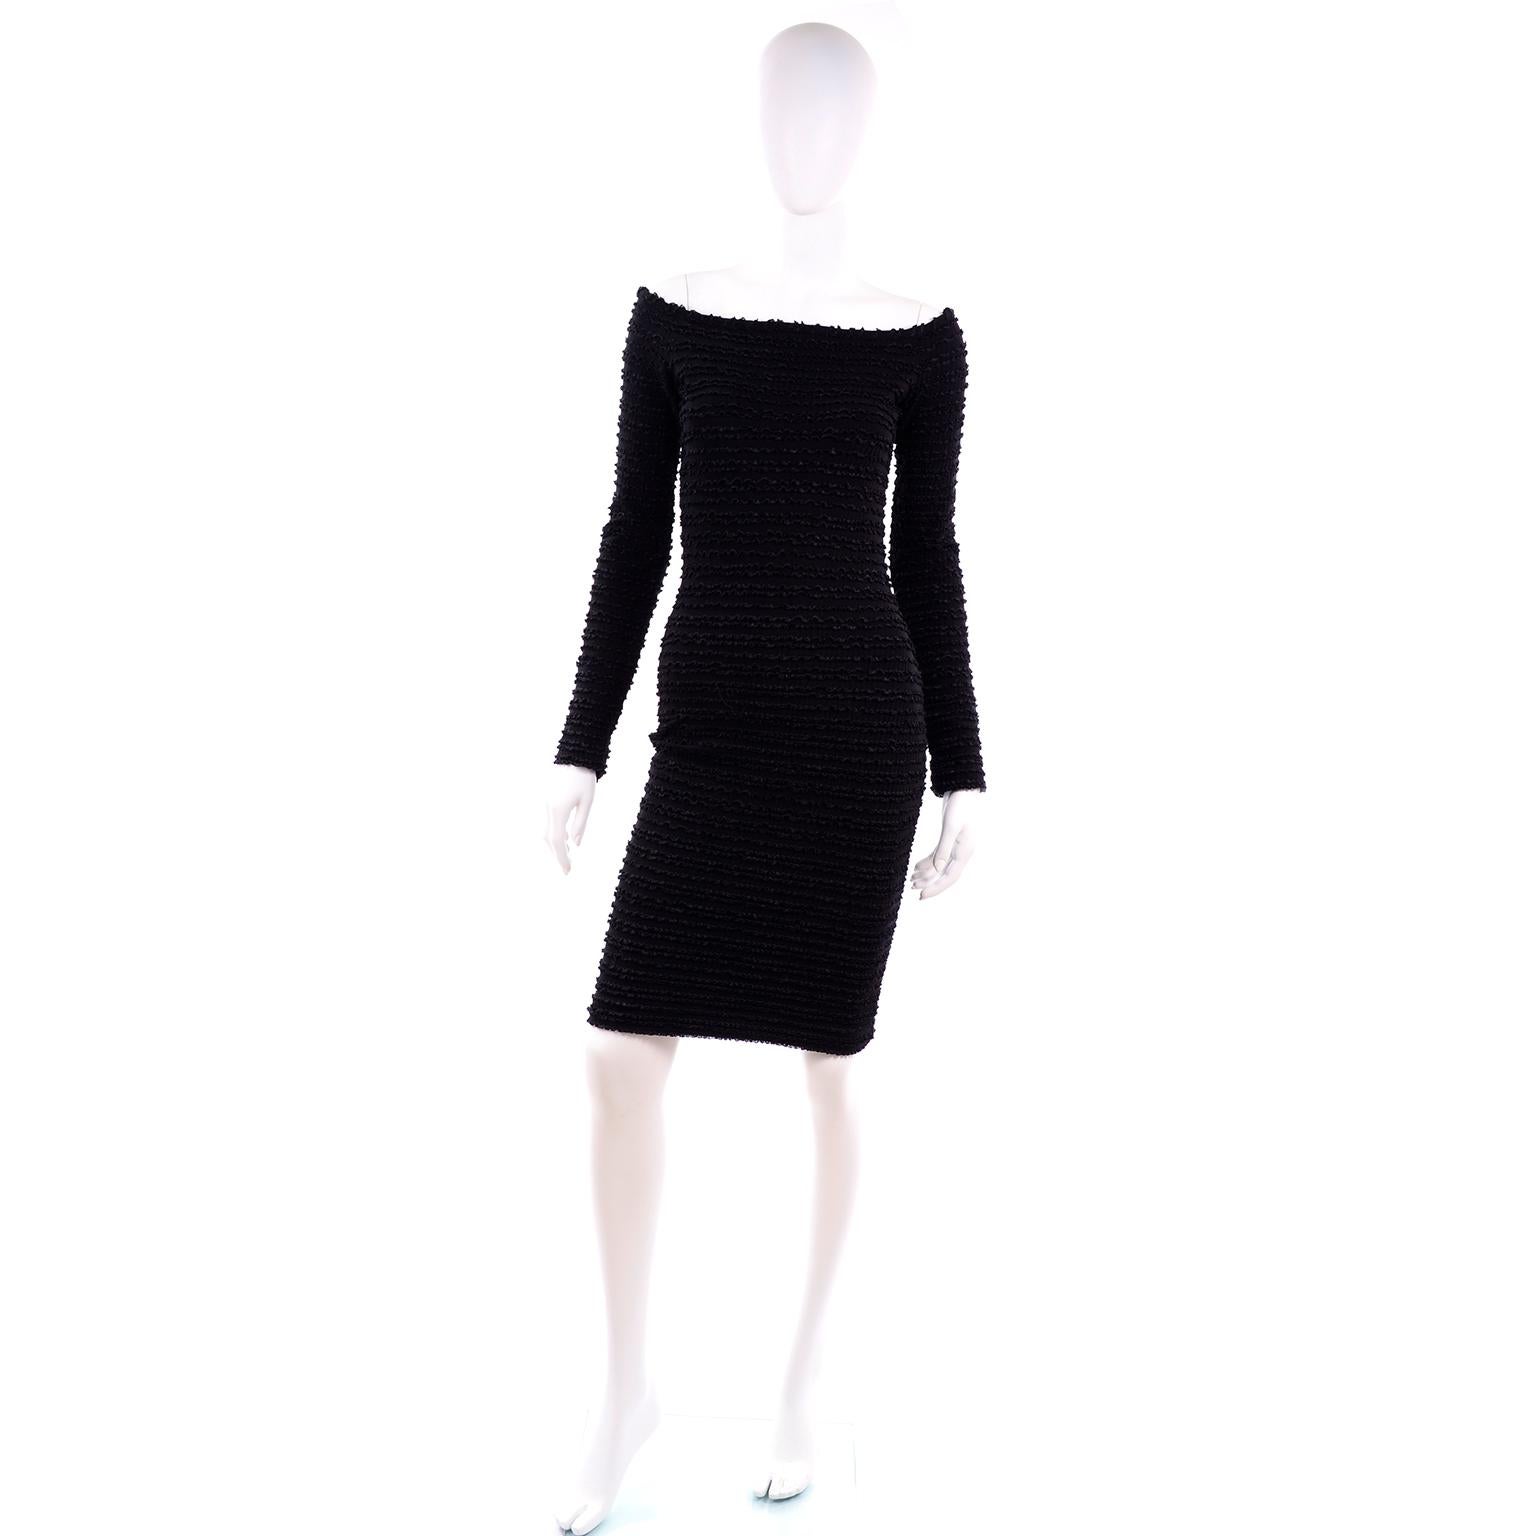 This is a 1988 black Patrick Kelly stretch bodycon dress with textured ruffle details horizontally across the entire dress. This wonderful 1980's dress has long sleeves and a scoop neck and back. This mini dress hem hits mid thigh and is marked a